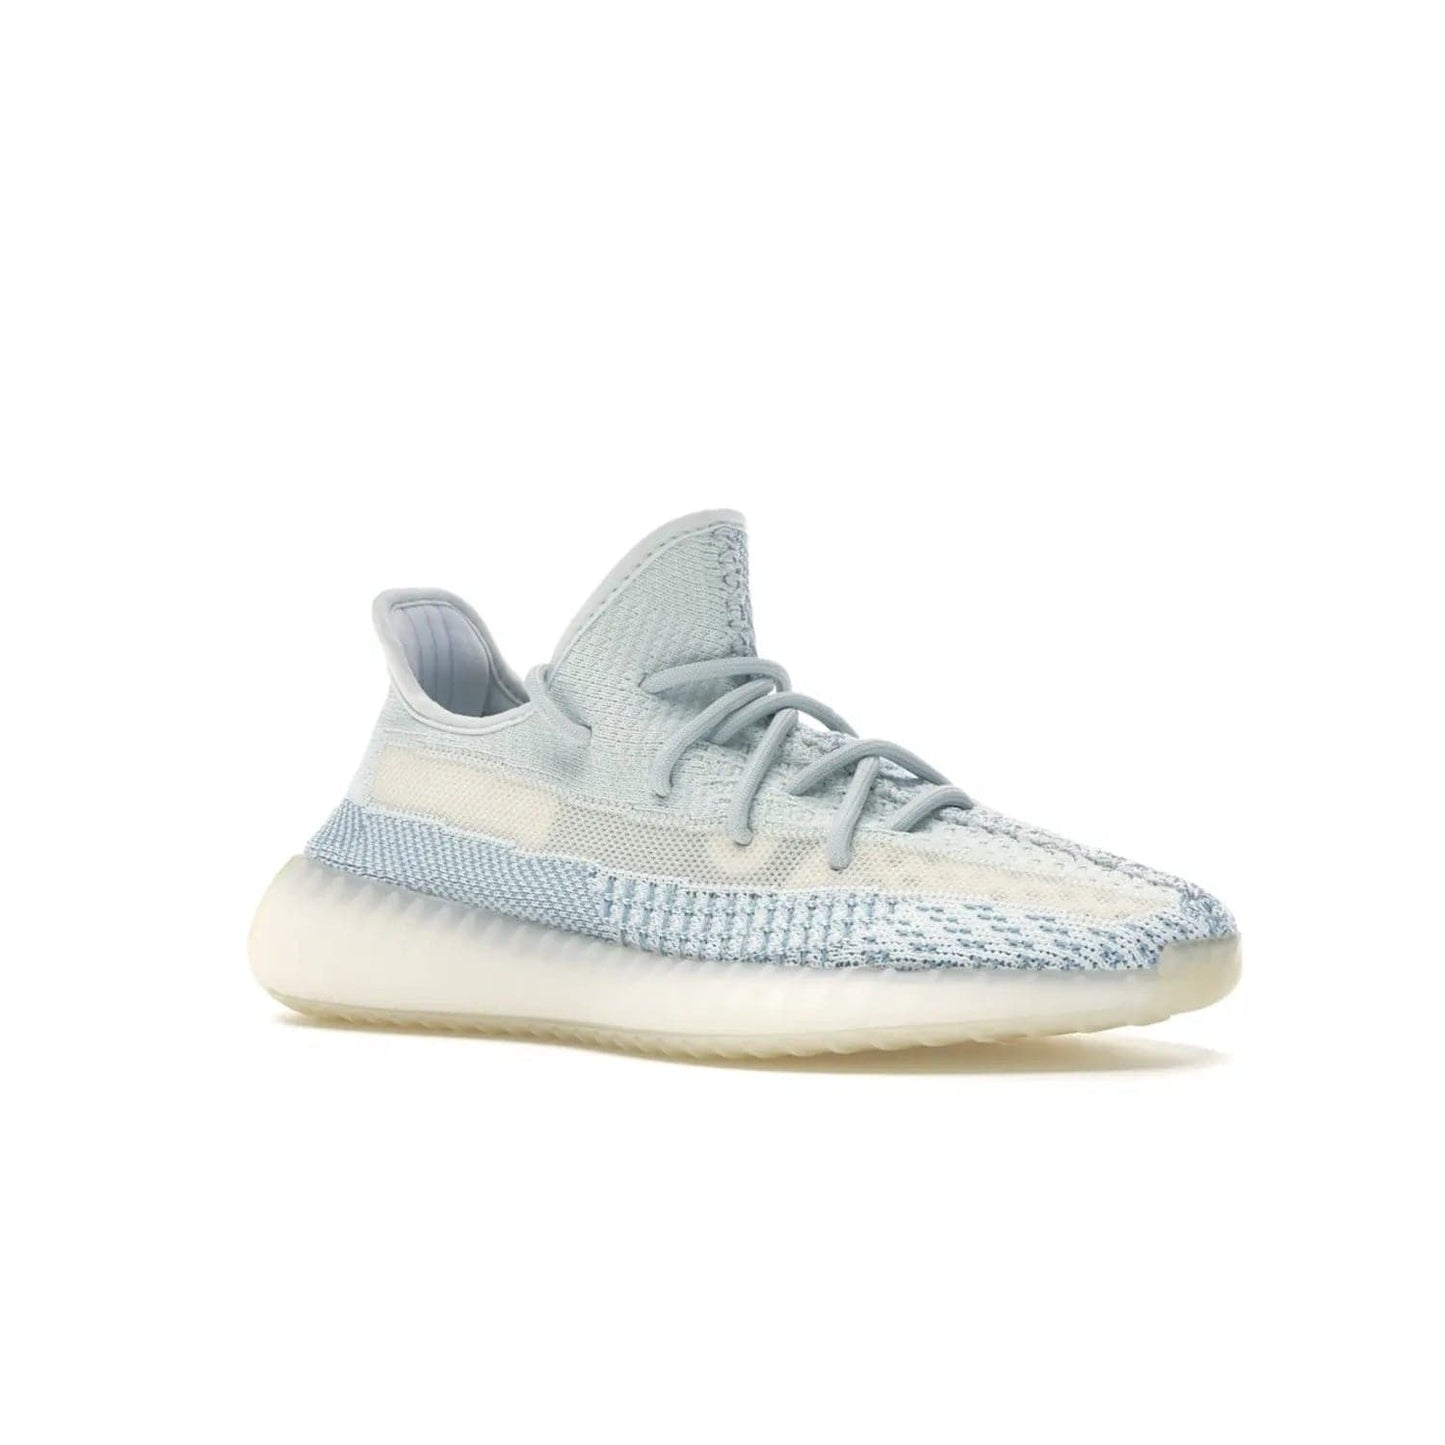 adidas Yeezy Boost 350 V2 Cloud White (Non-Reflective) - Image 4 - Only at www.BallersClubKickz.com - Adidas Yeezy Boost 350 V2 Cloud White (Non-Reflective) features Primeknit fabric and a unique, eye-catching design of cream, bluish-white, and transparent strip. Step out in timeless style with this eye-catching sneaker.